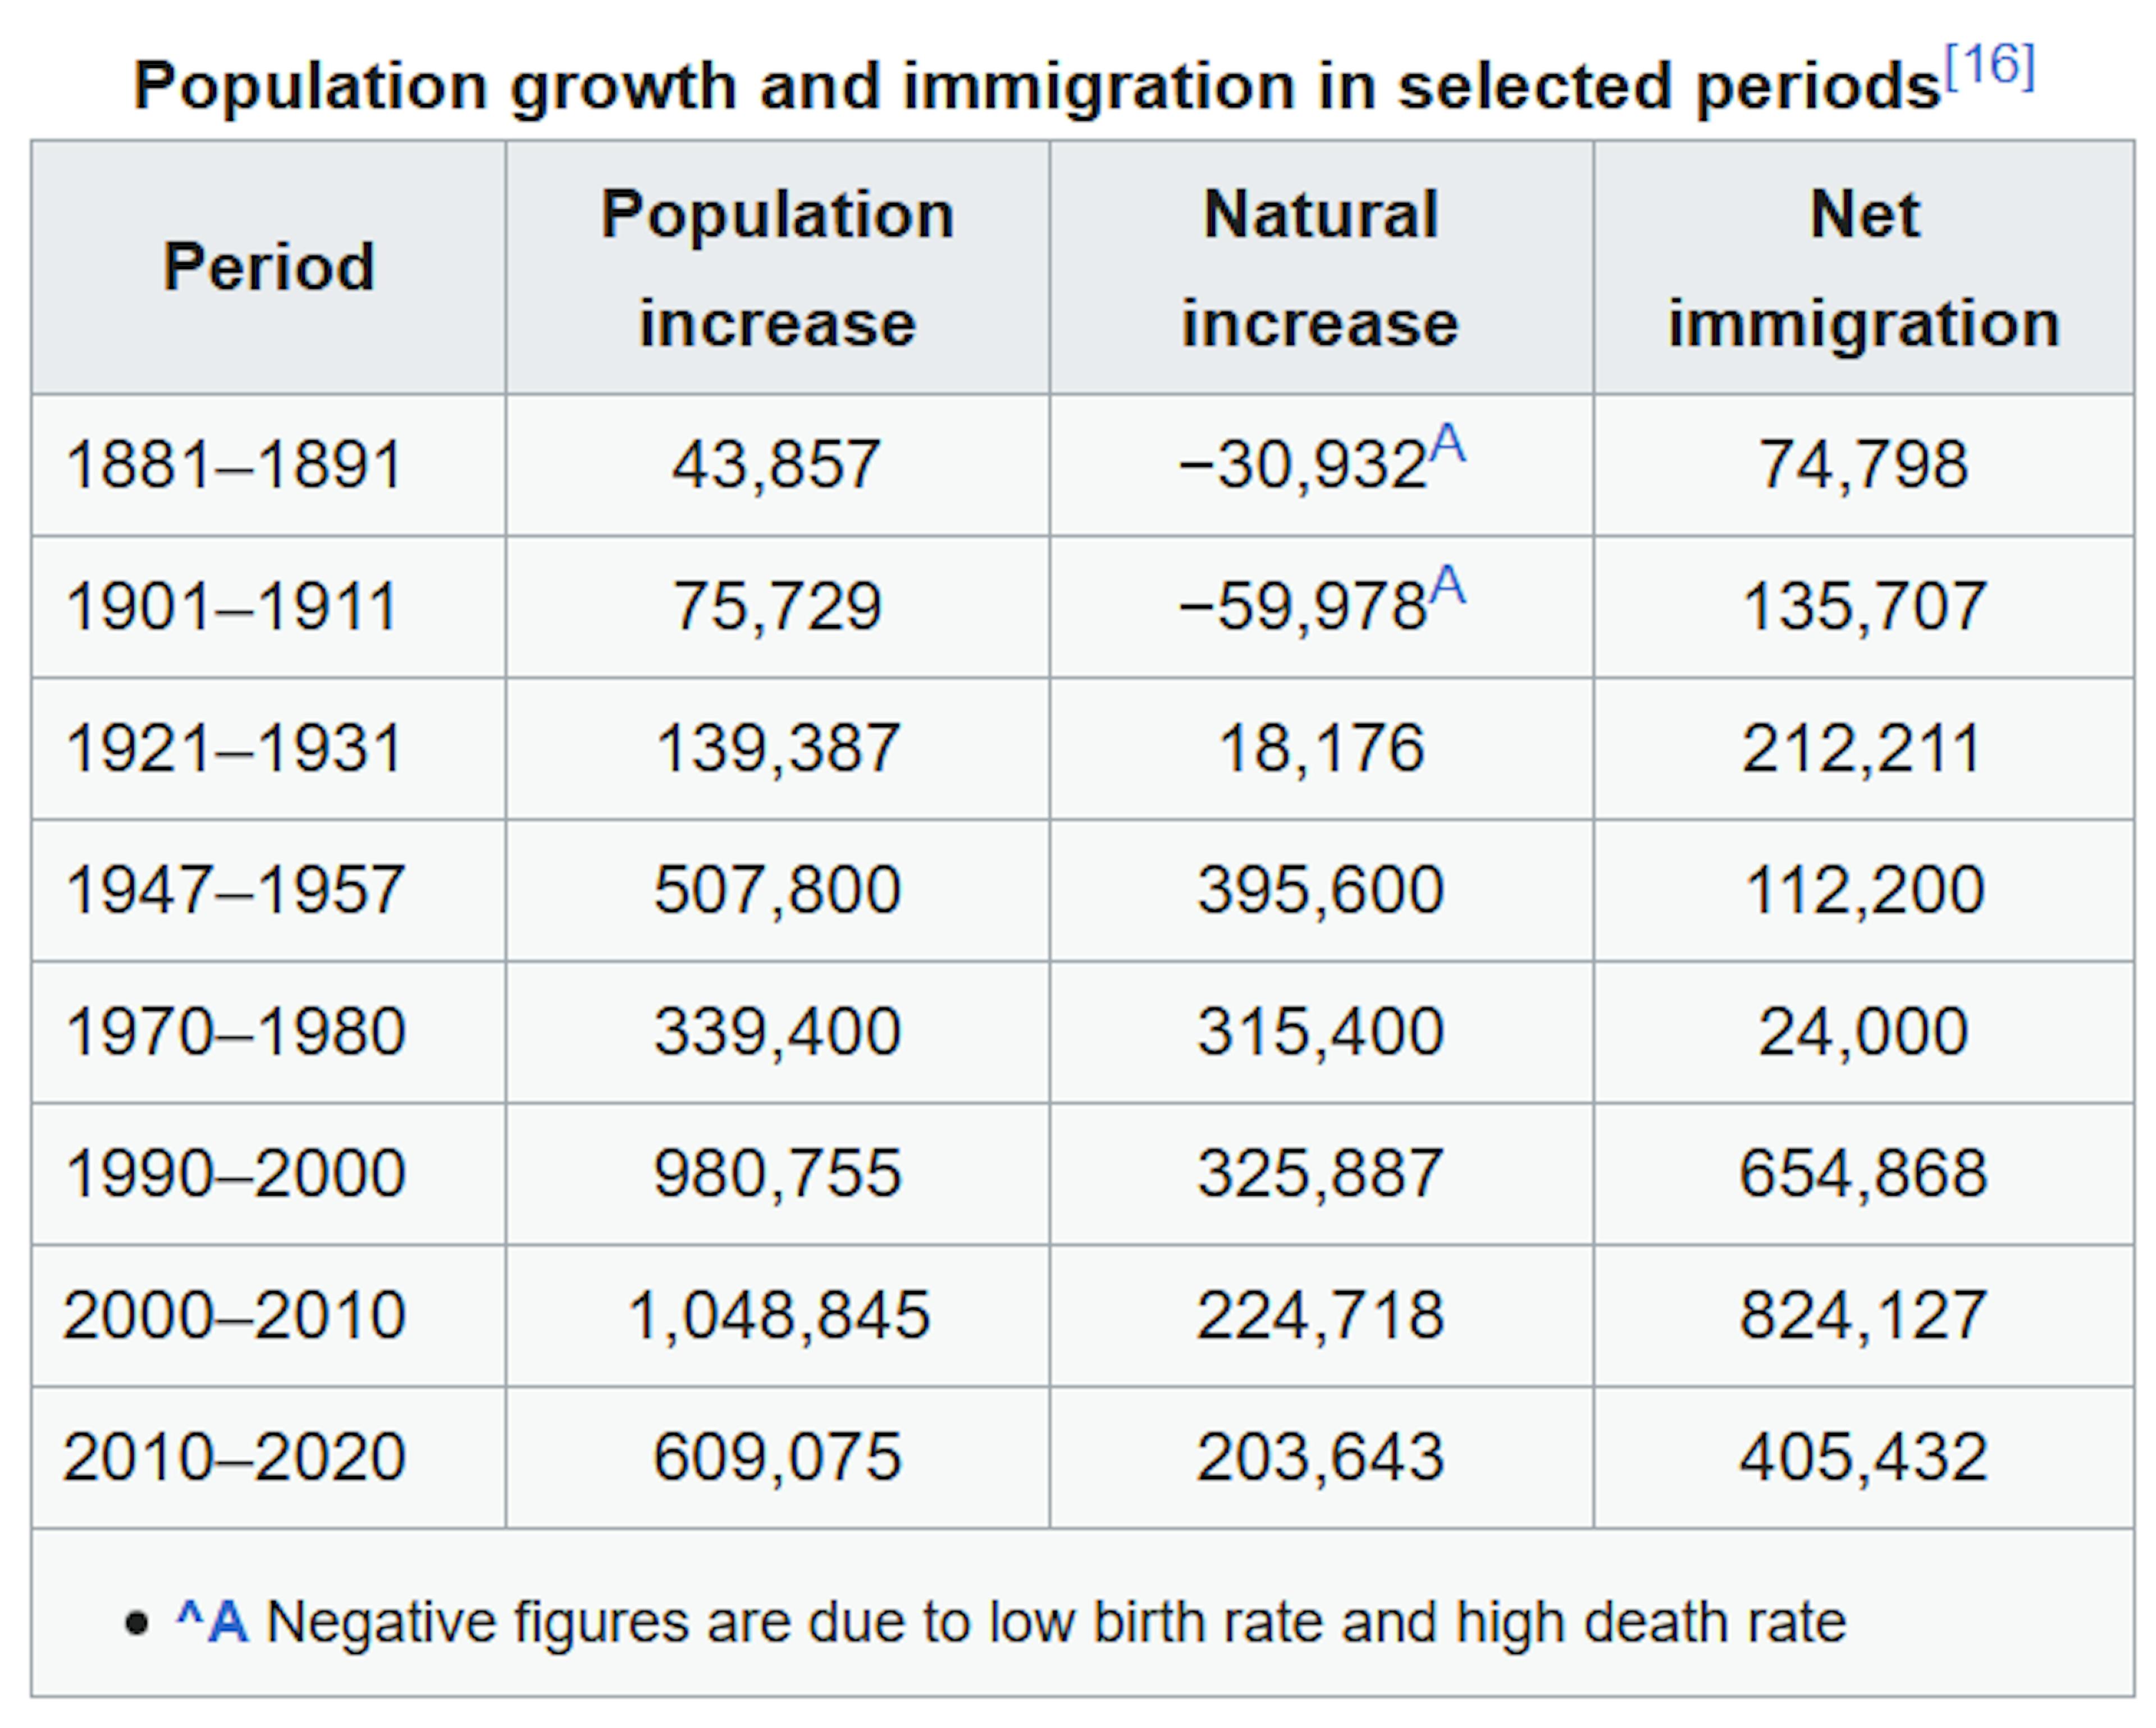 chart showing population growth and immigration 1880-2020 in Singapore.